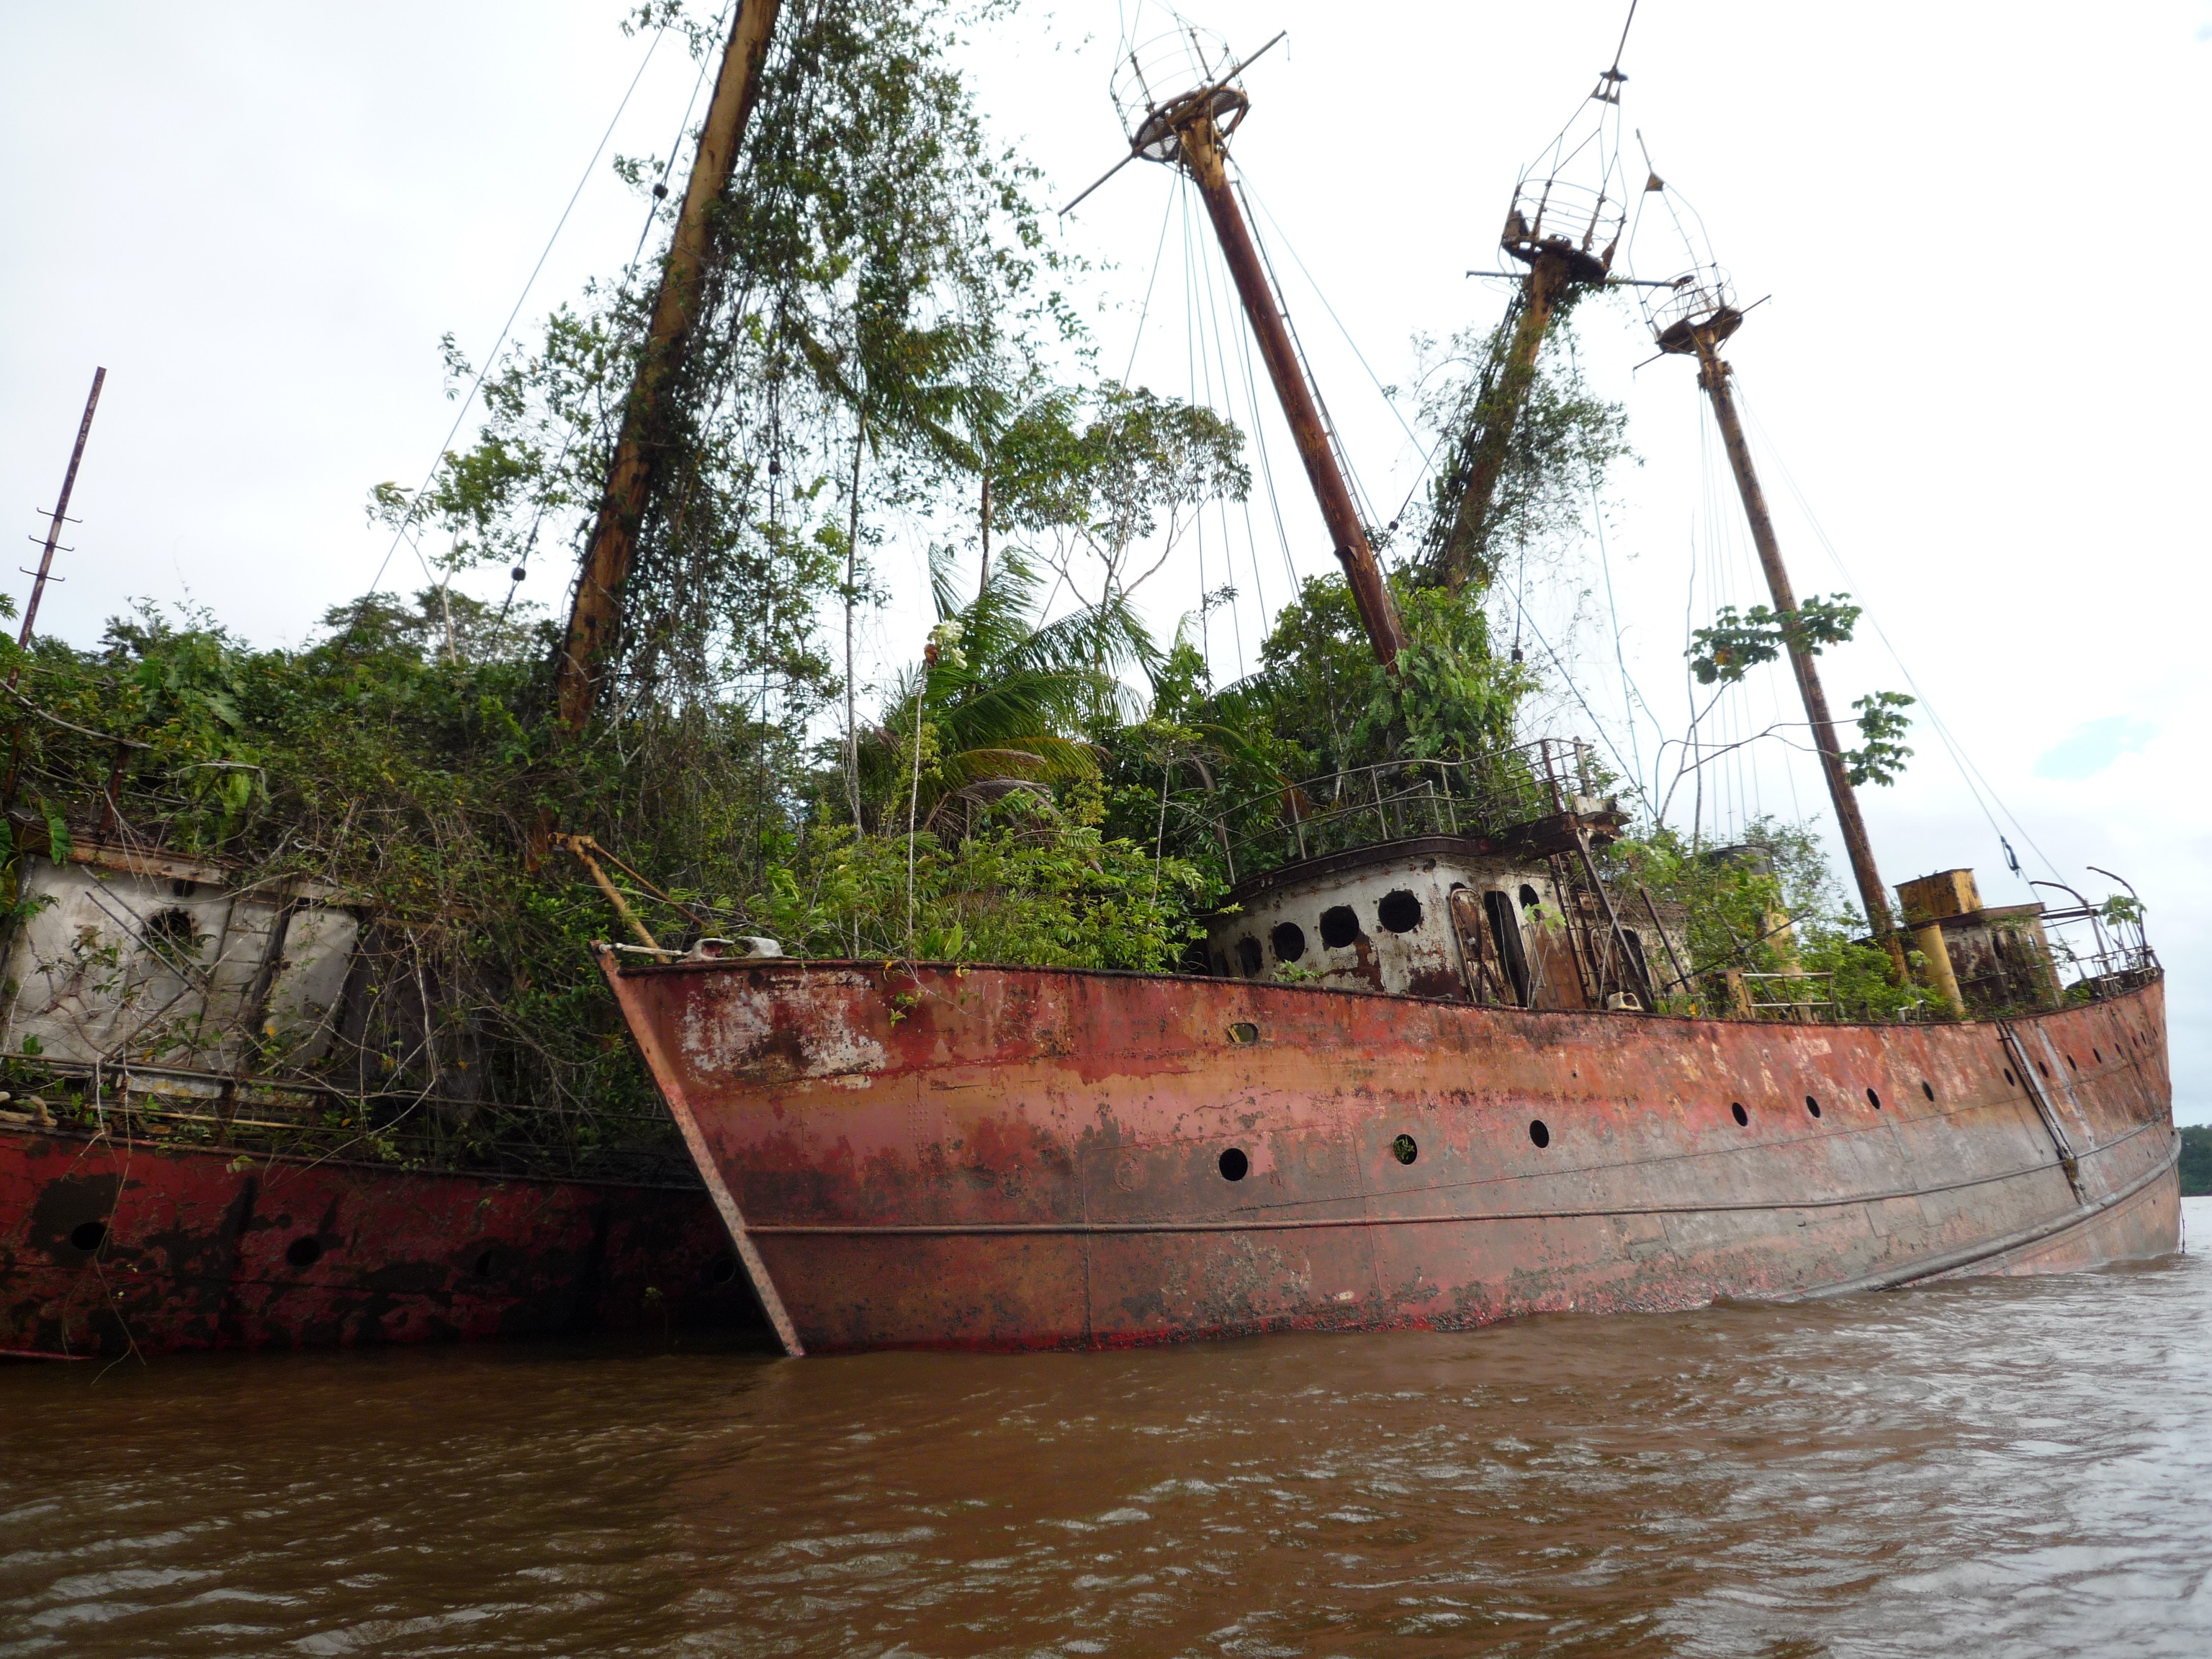 General 3072x2304 ship old ship trees shipwreck abandoned rust wreck river plants vehicle